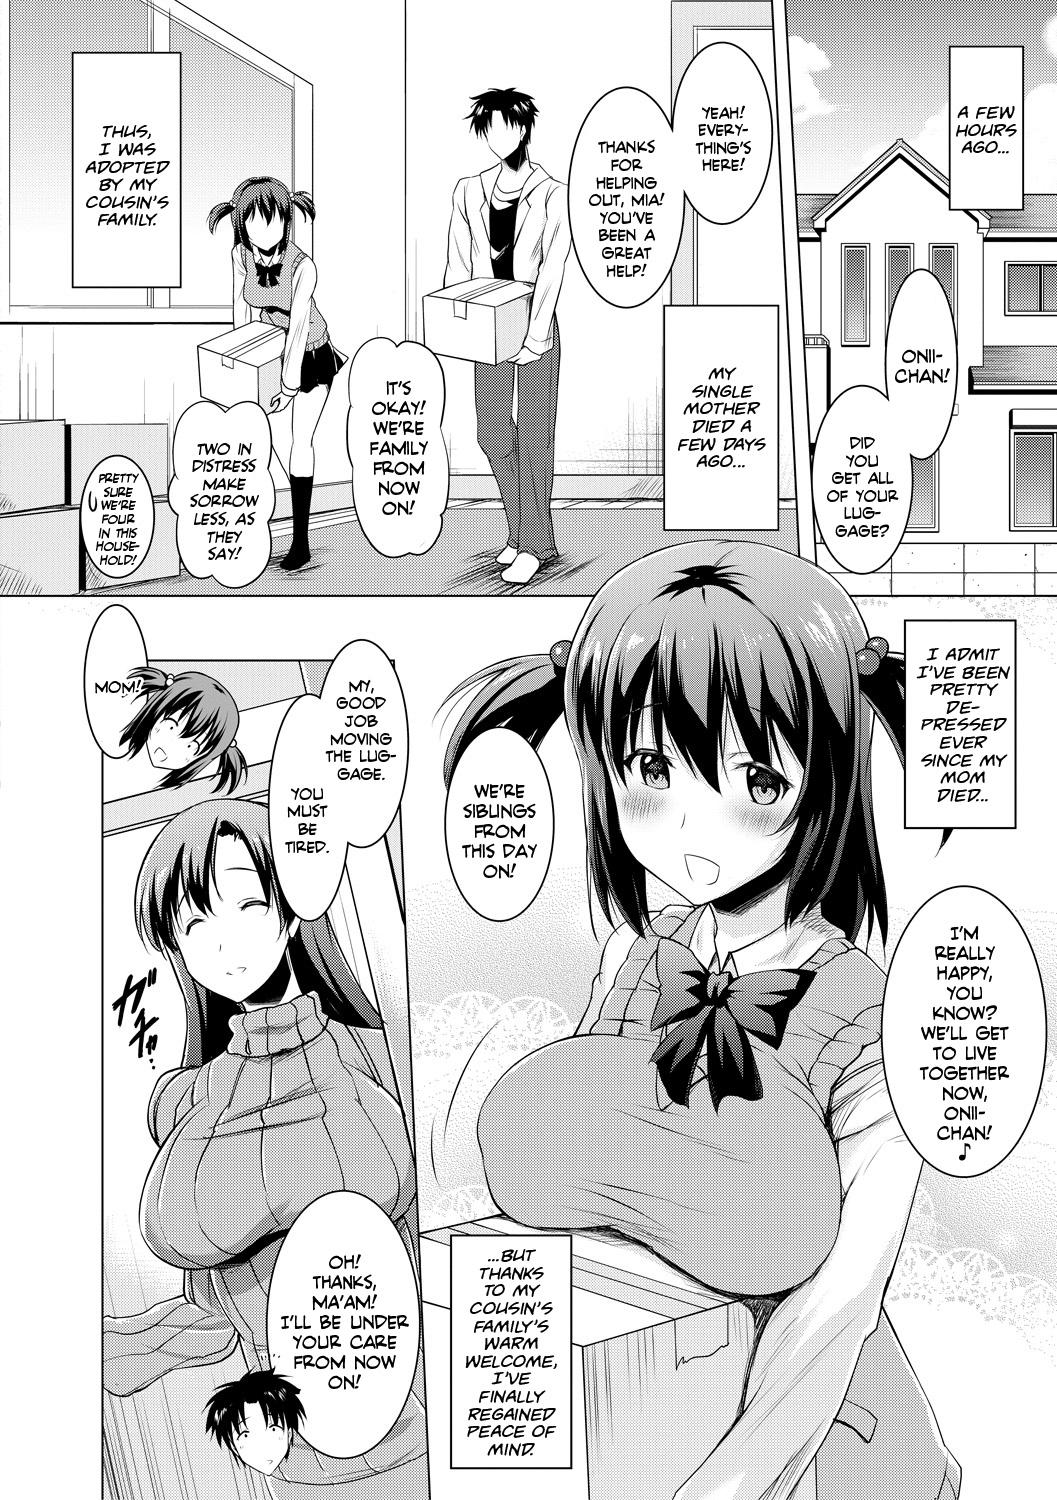 [Pony-R] I Can't Live Without My Little Sister's Tongue Chapter 01-02 + Secret Baby-making Sex with a Big-titted Mother and Daughter! (Kyonyuu Oyako no Shita to Shikyuu ni Renzoku Shasei) [English] [Team Rabu2] [Digital] 4